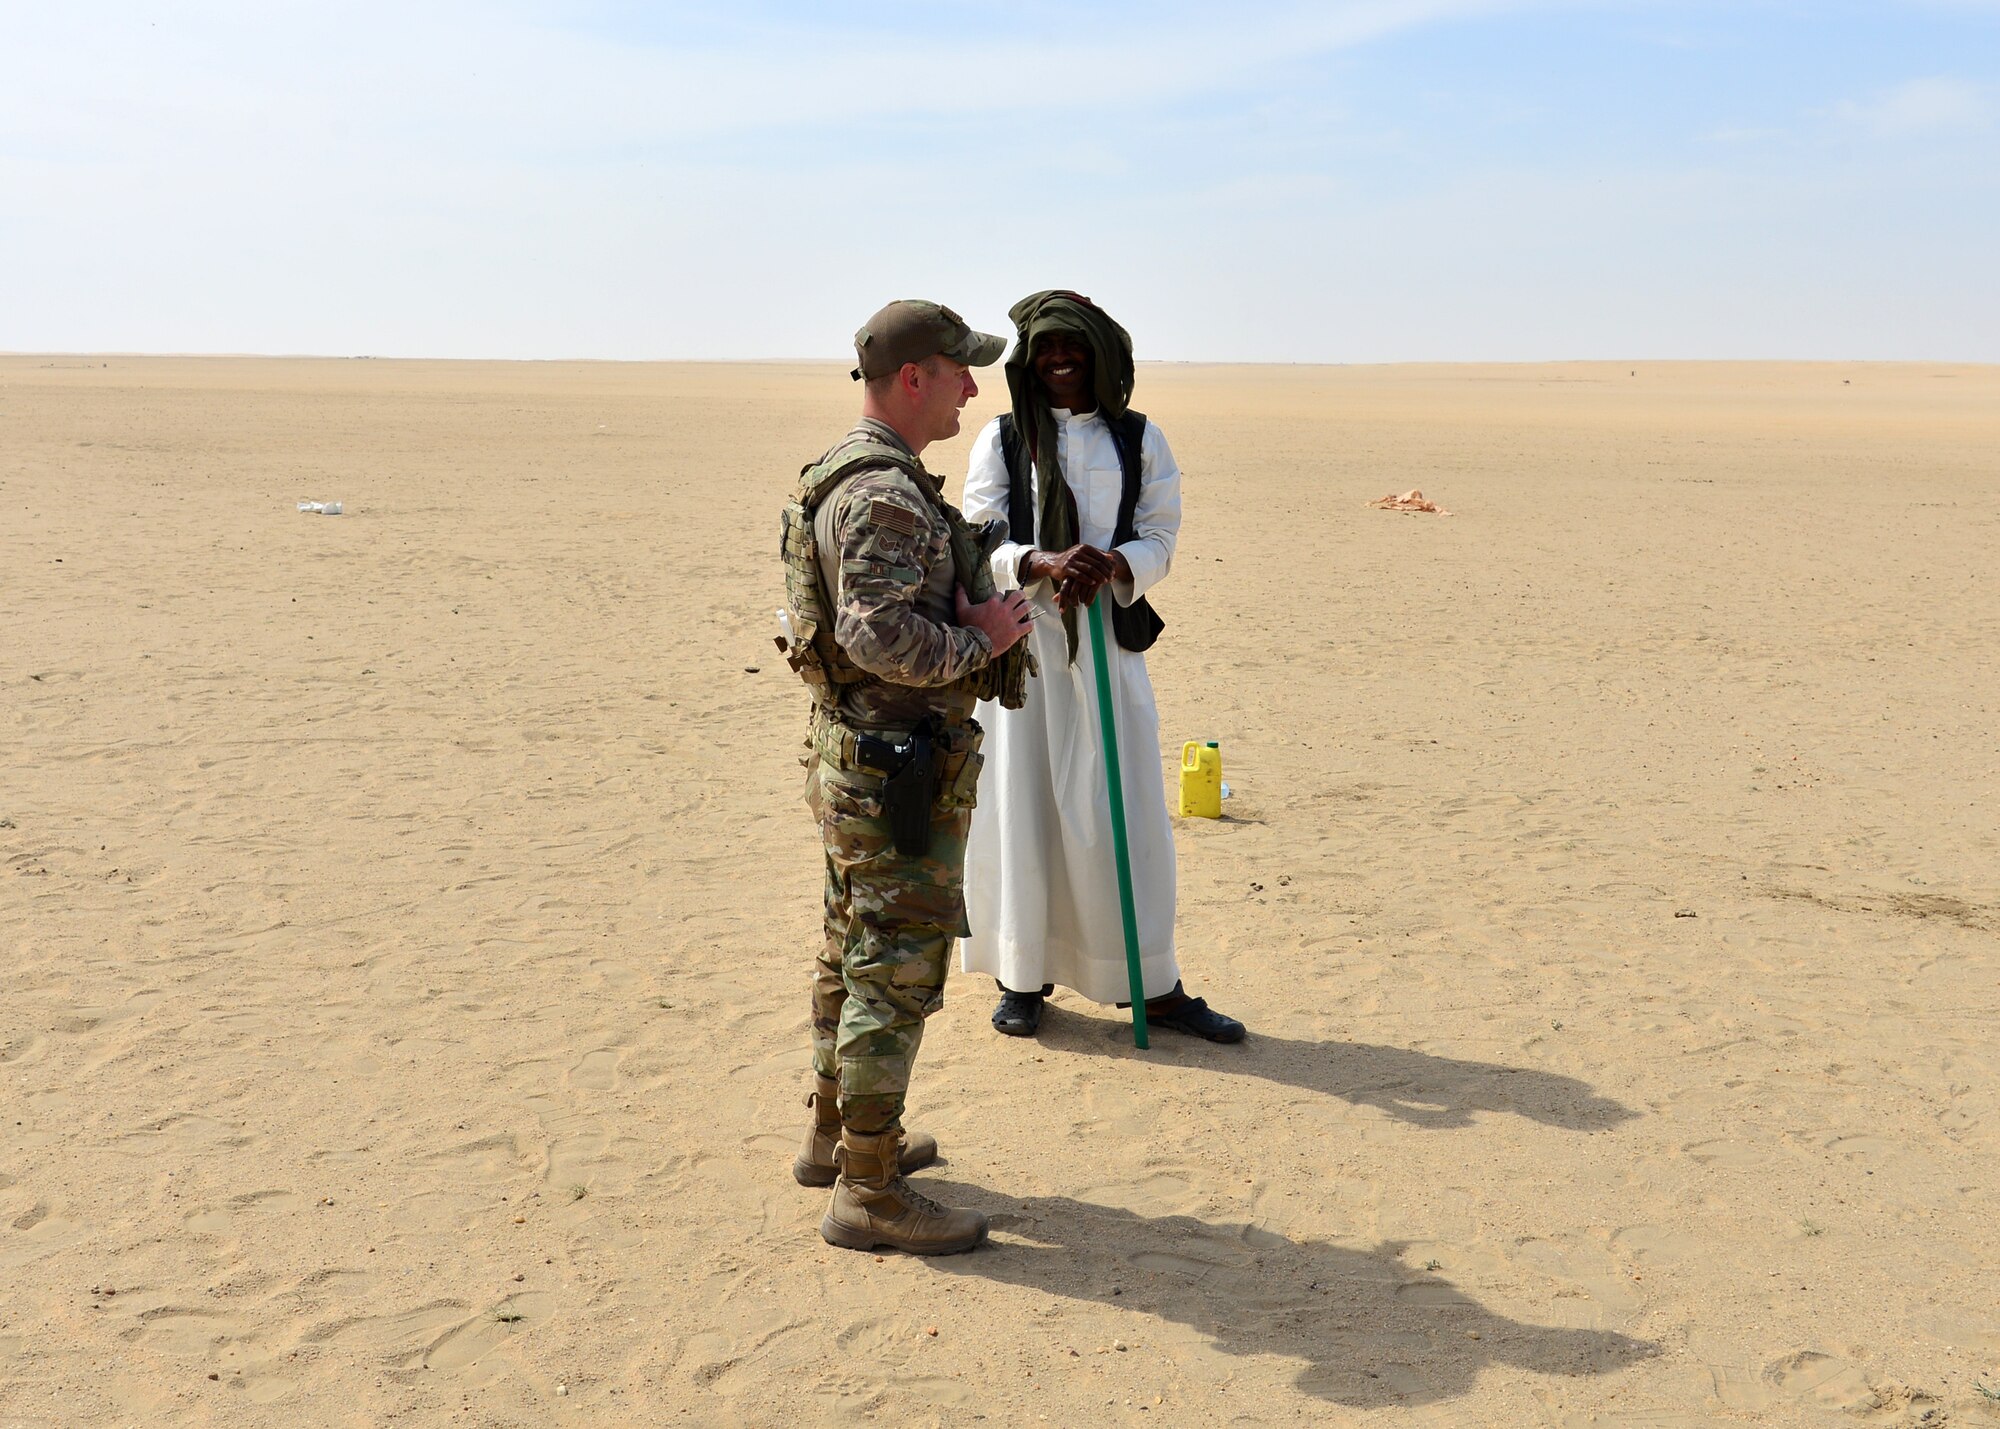 Airman interacts with Kuwait local